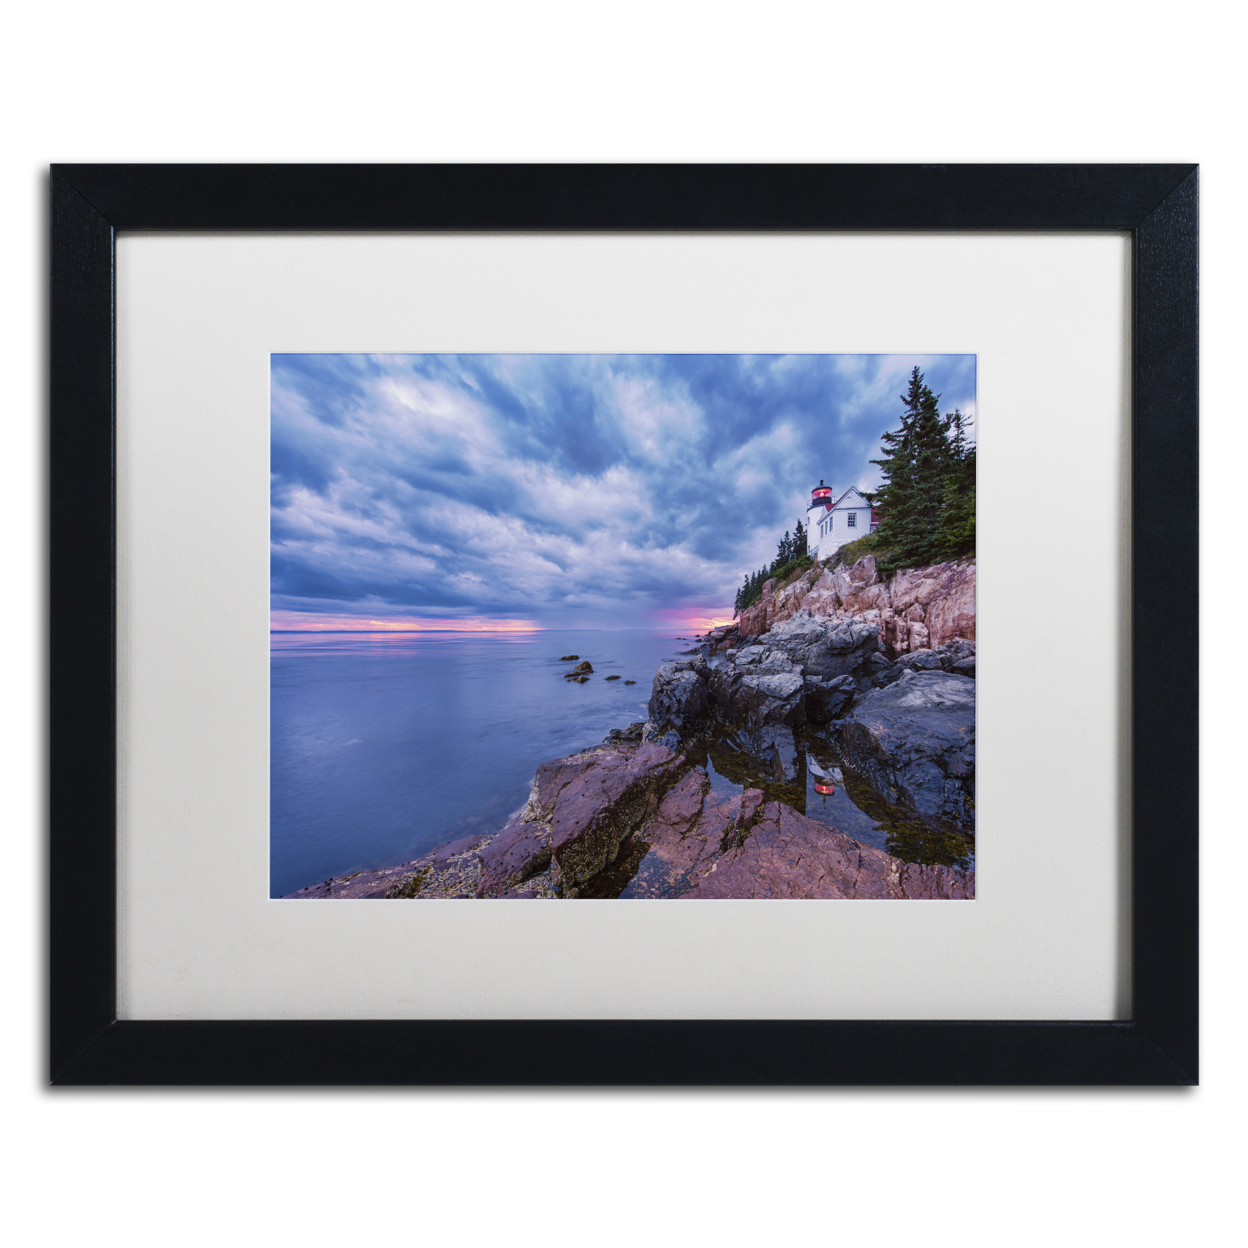 Michael Blanchette Photography 'Beacon Reflection' Black Wooden Framed Art 18 X 22 Inches